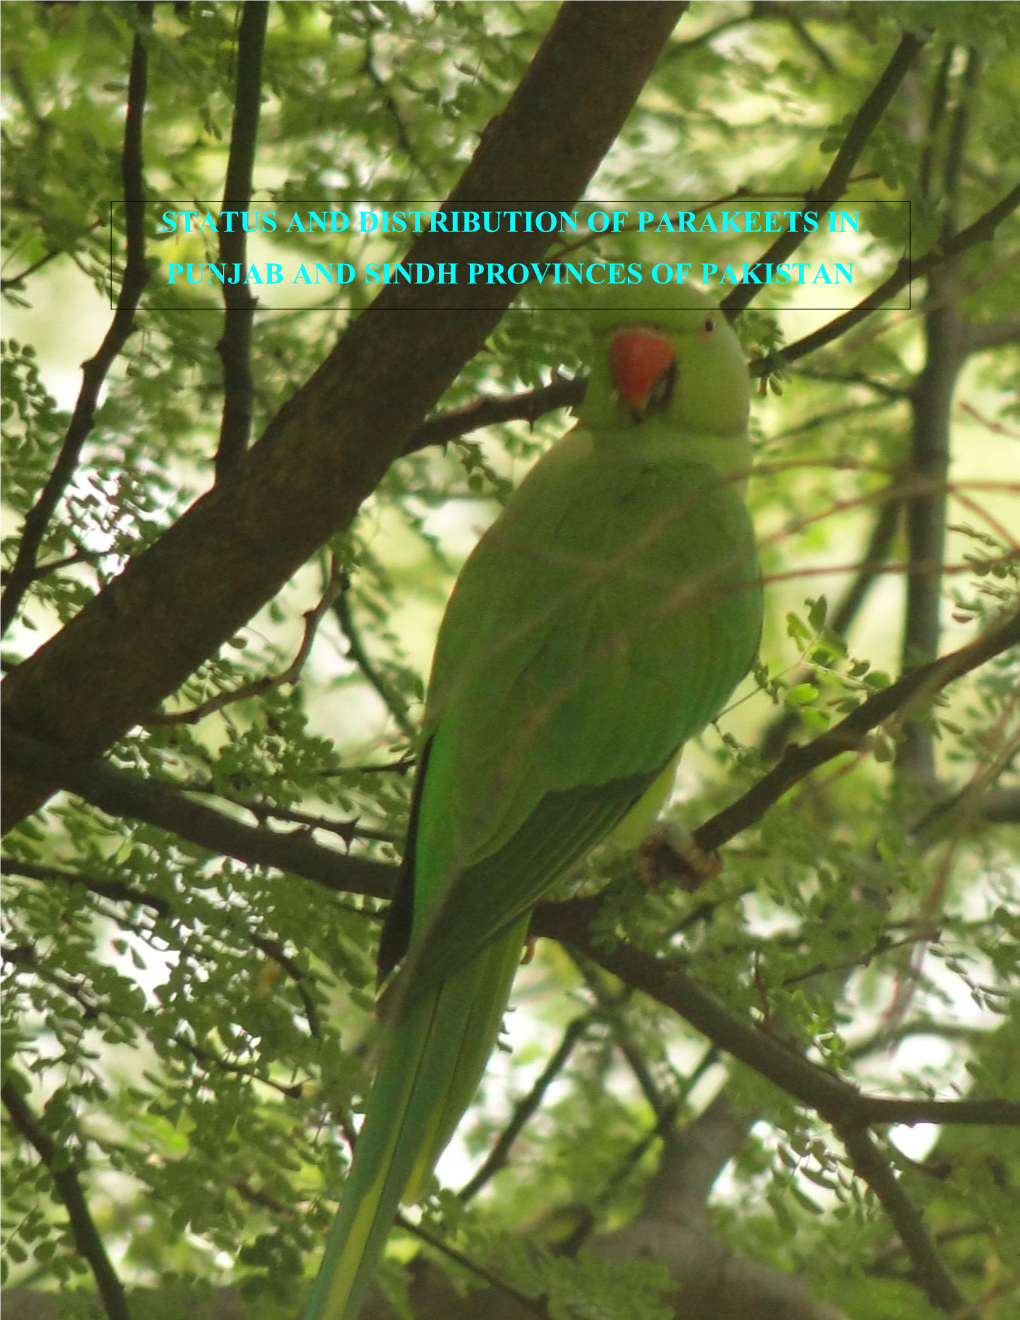 Status and Distribution of Parakeets in Punjab and Sindh Provinces of Pakistan